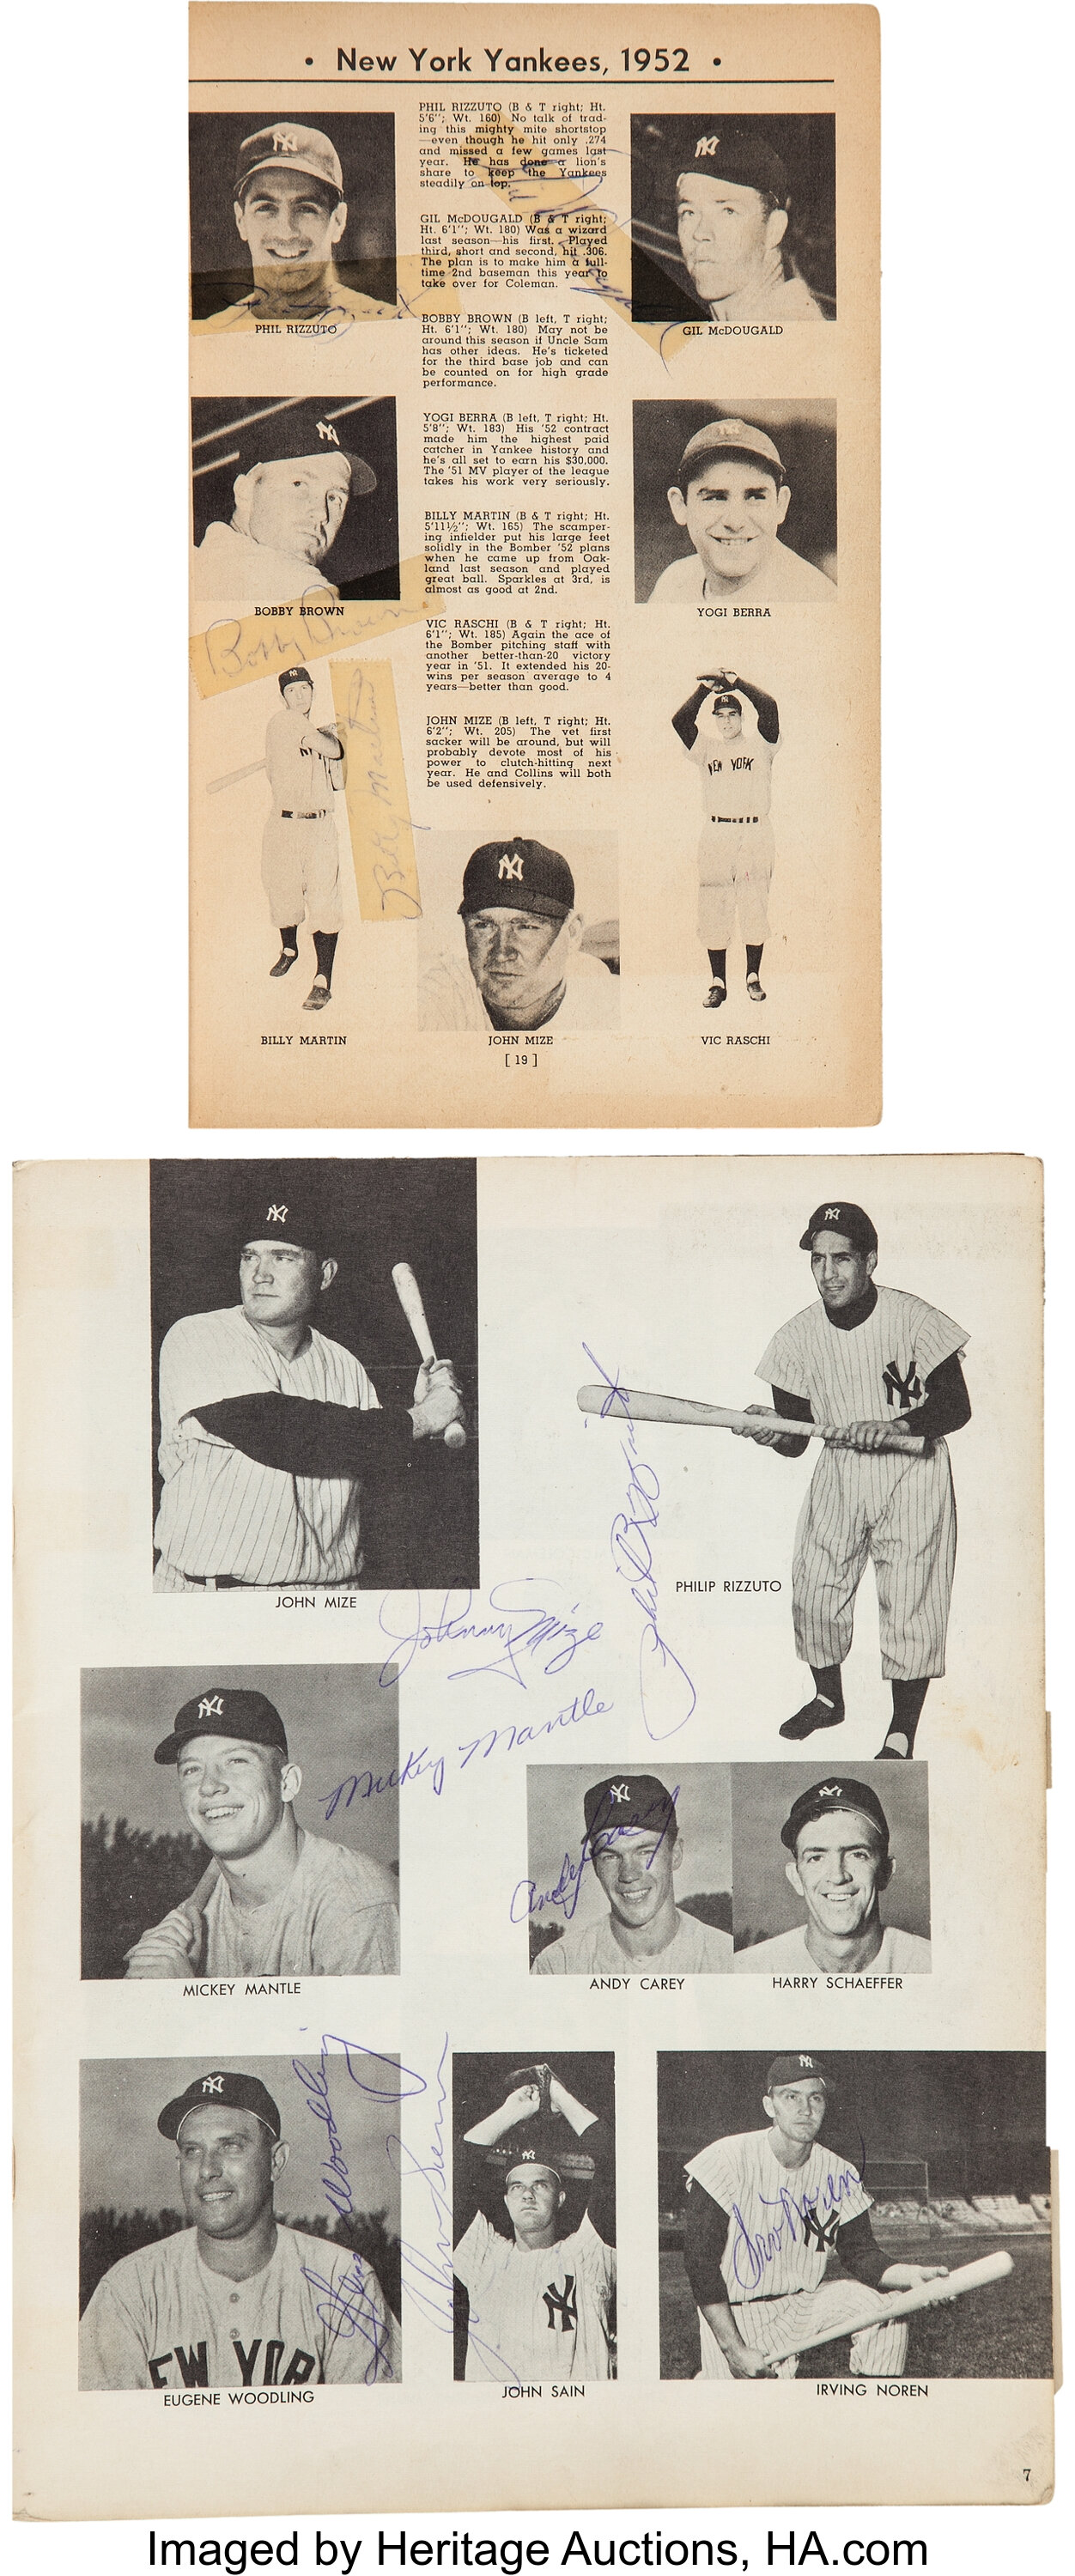 Mickey Mantle and Eddie Mathews Signed Photograph